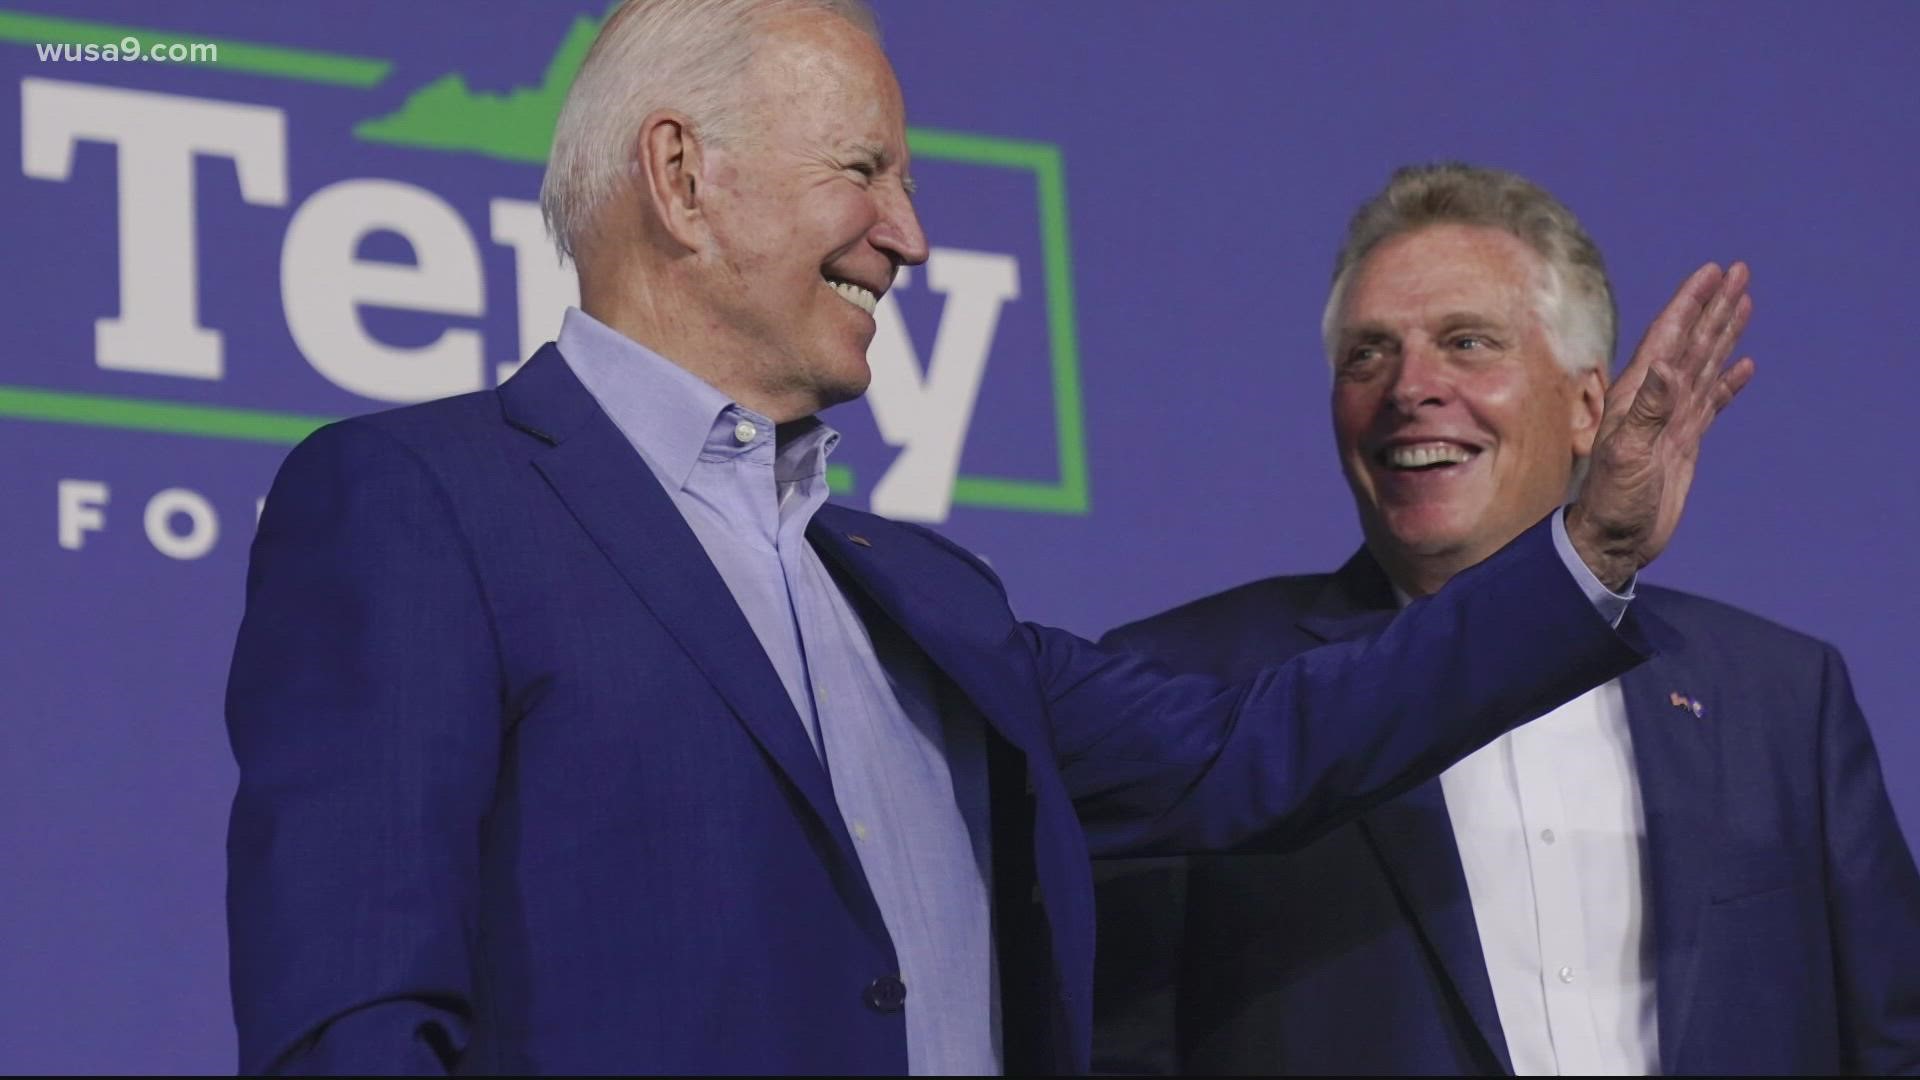 The latest survey conducted by Emerson College & Nexstar Media shows both candidates at 49%, with McAuliffe’s support remaining unchanged from the poll's Sept. data